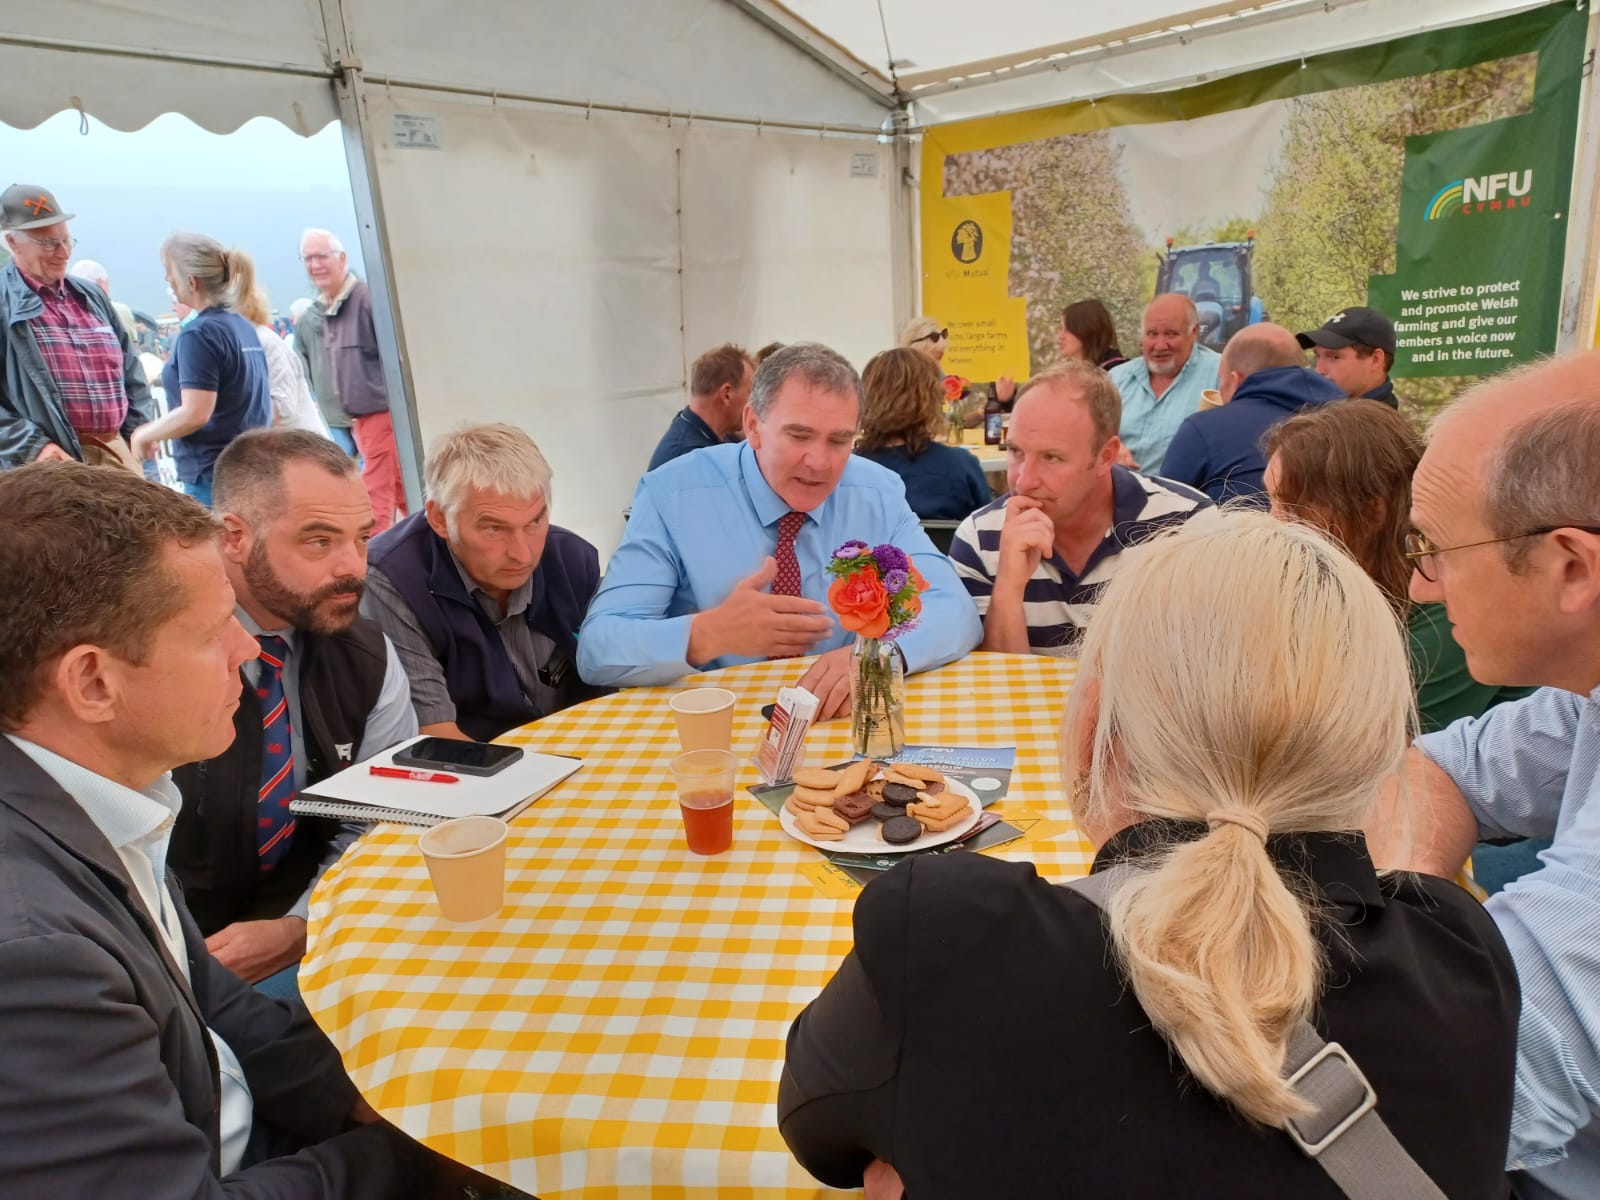 Members of NFU Cymru round a table with politicians at Meirionnydd County Show